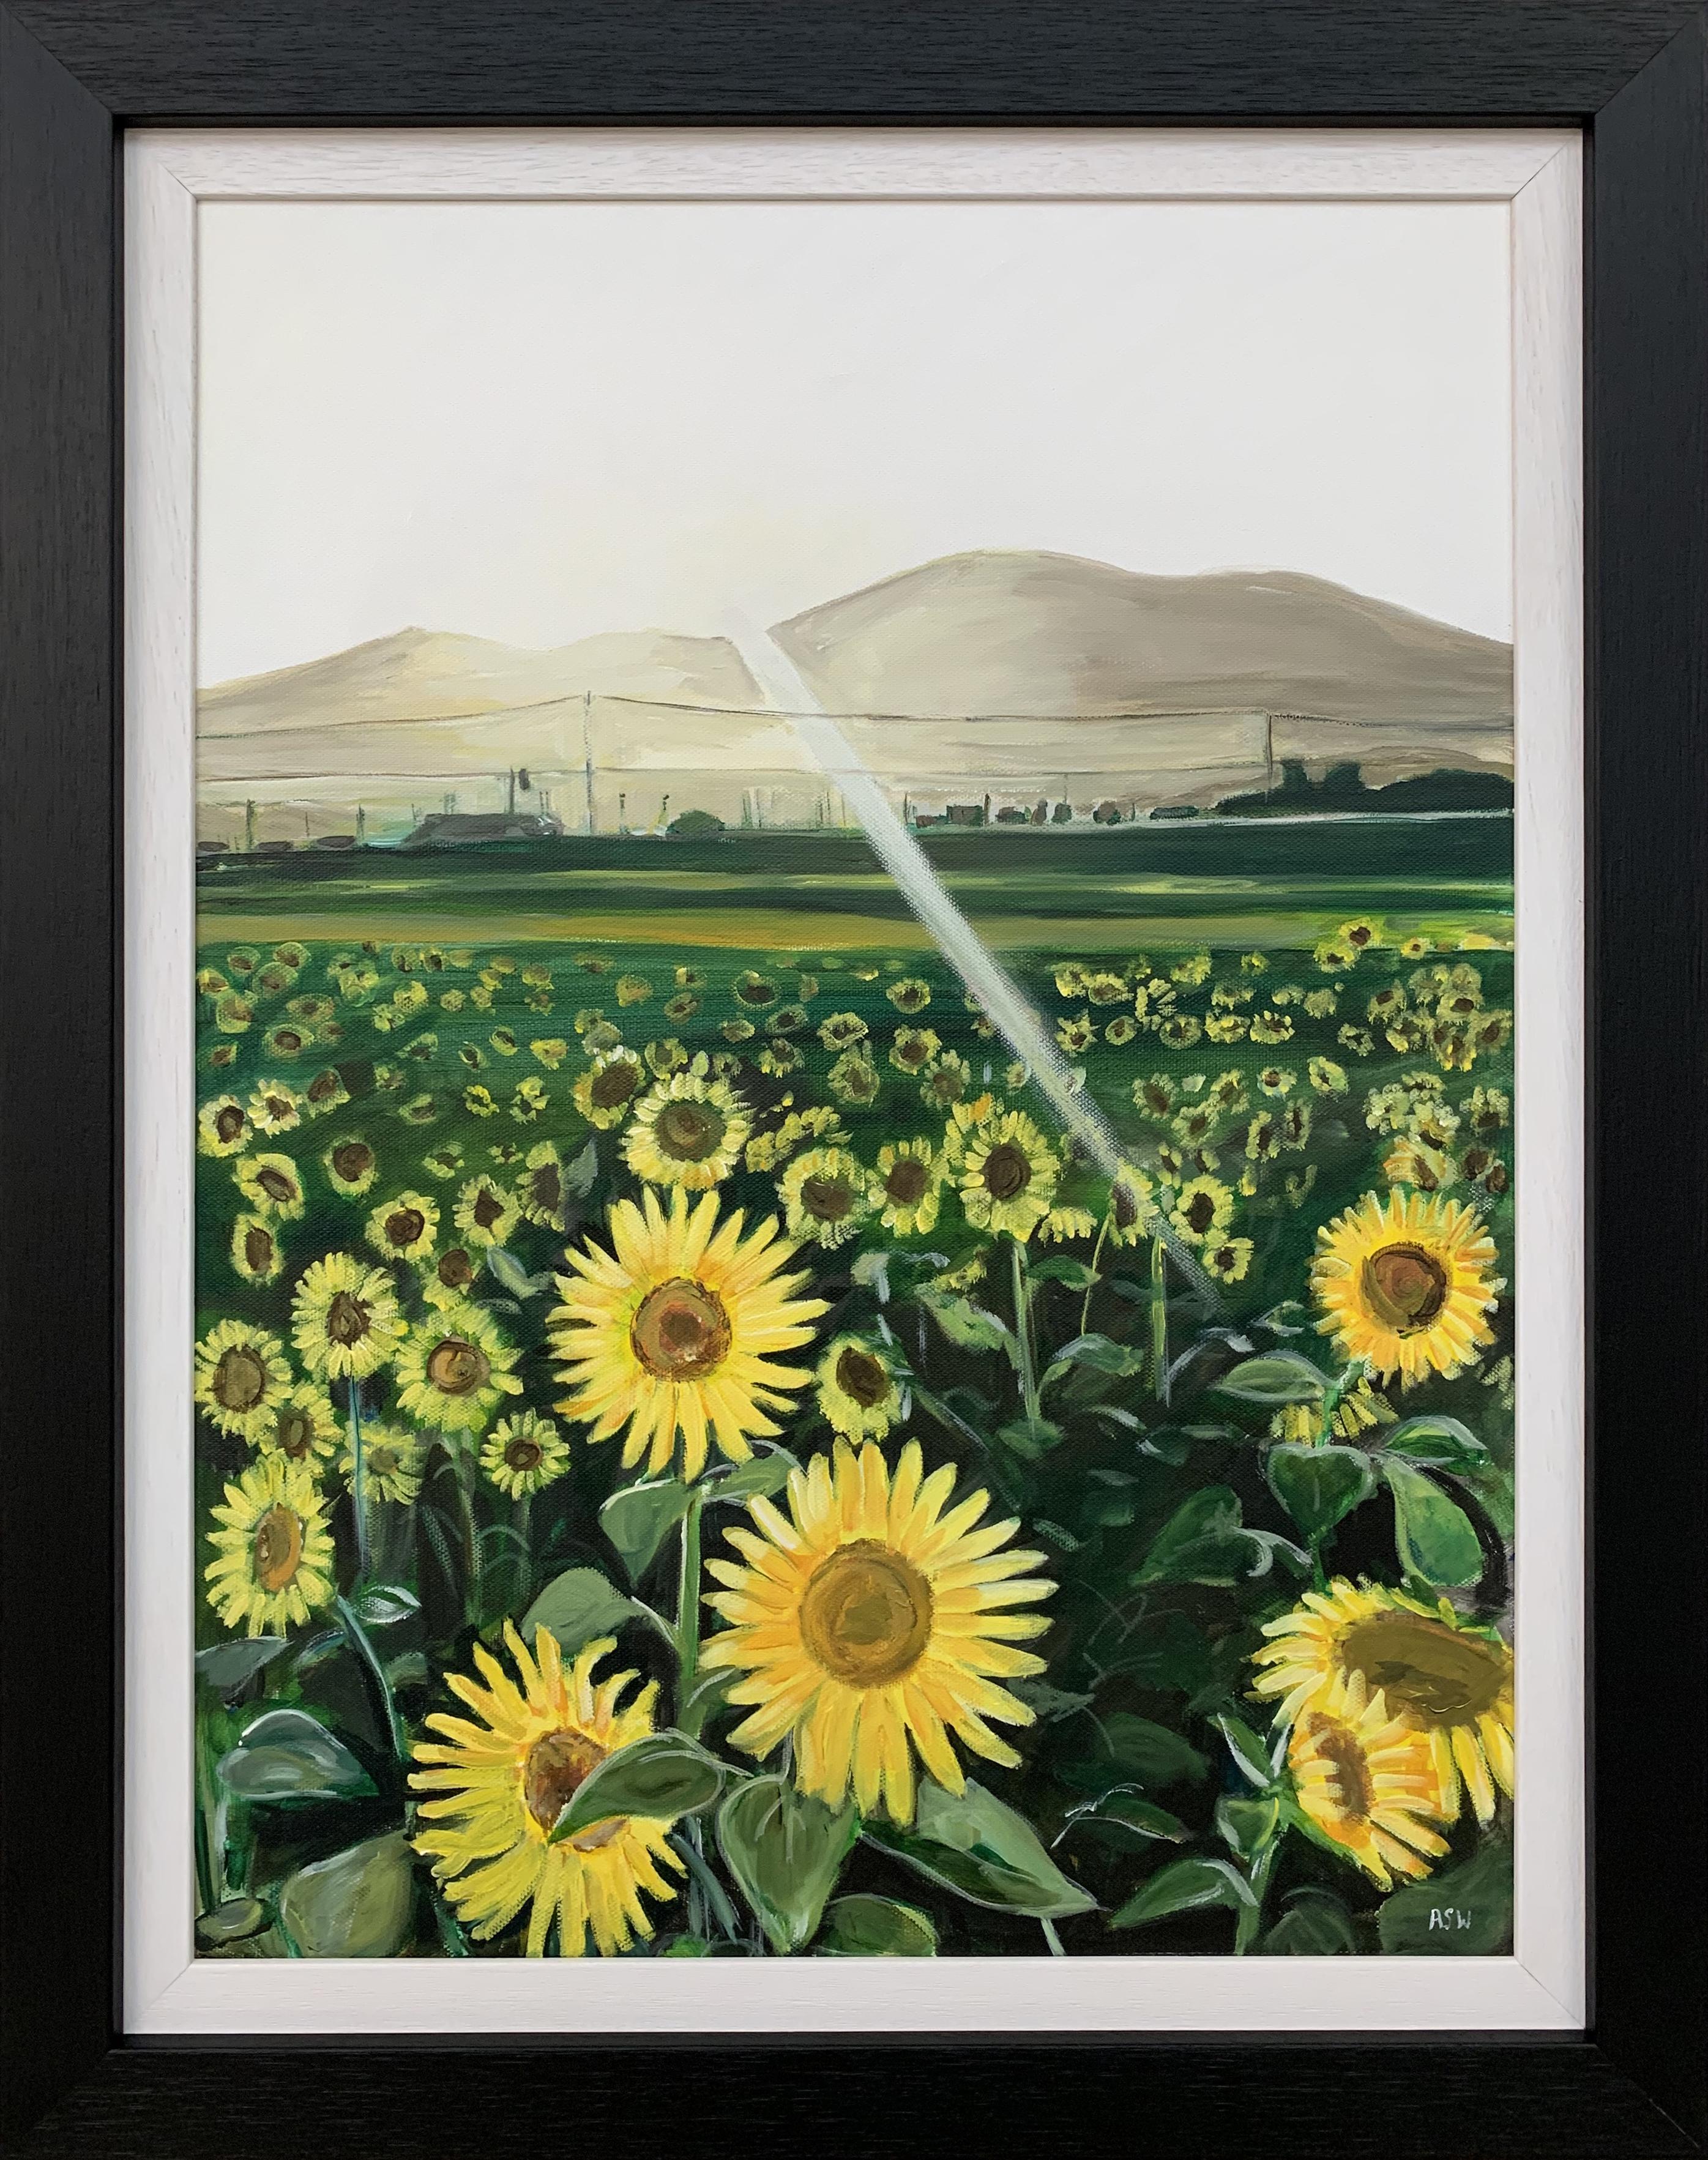 Angela Wakefield Figurative Painting - Original Painting of a Field of Sunflowers in Sunshine France by British Artist